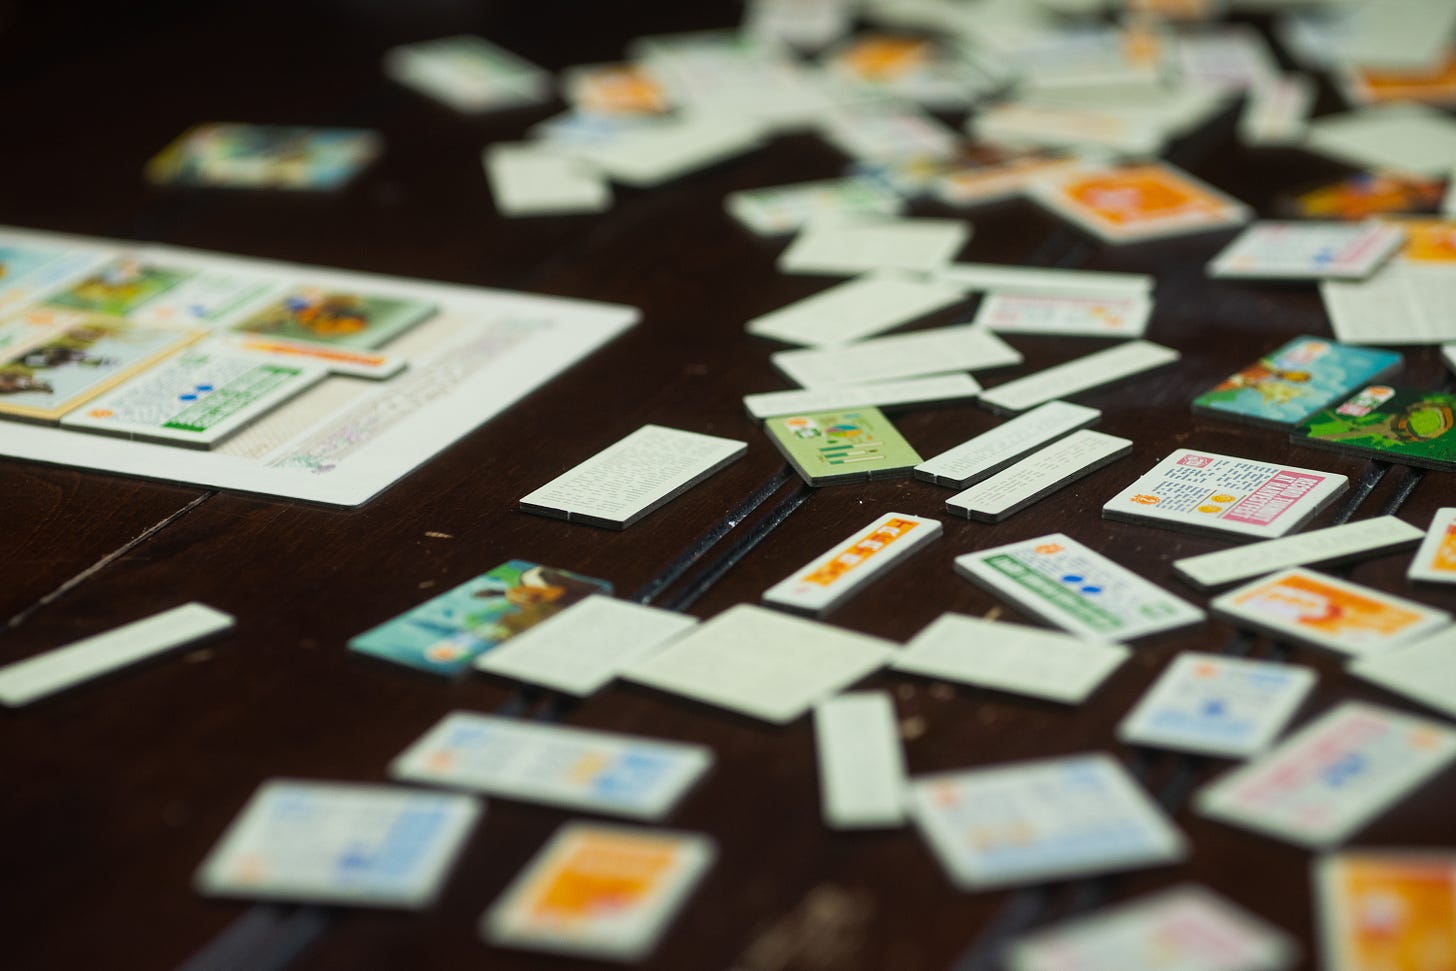 Tiles from the game Fit to Print are strewn across the table, with a newspaper board in the background.